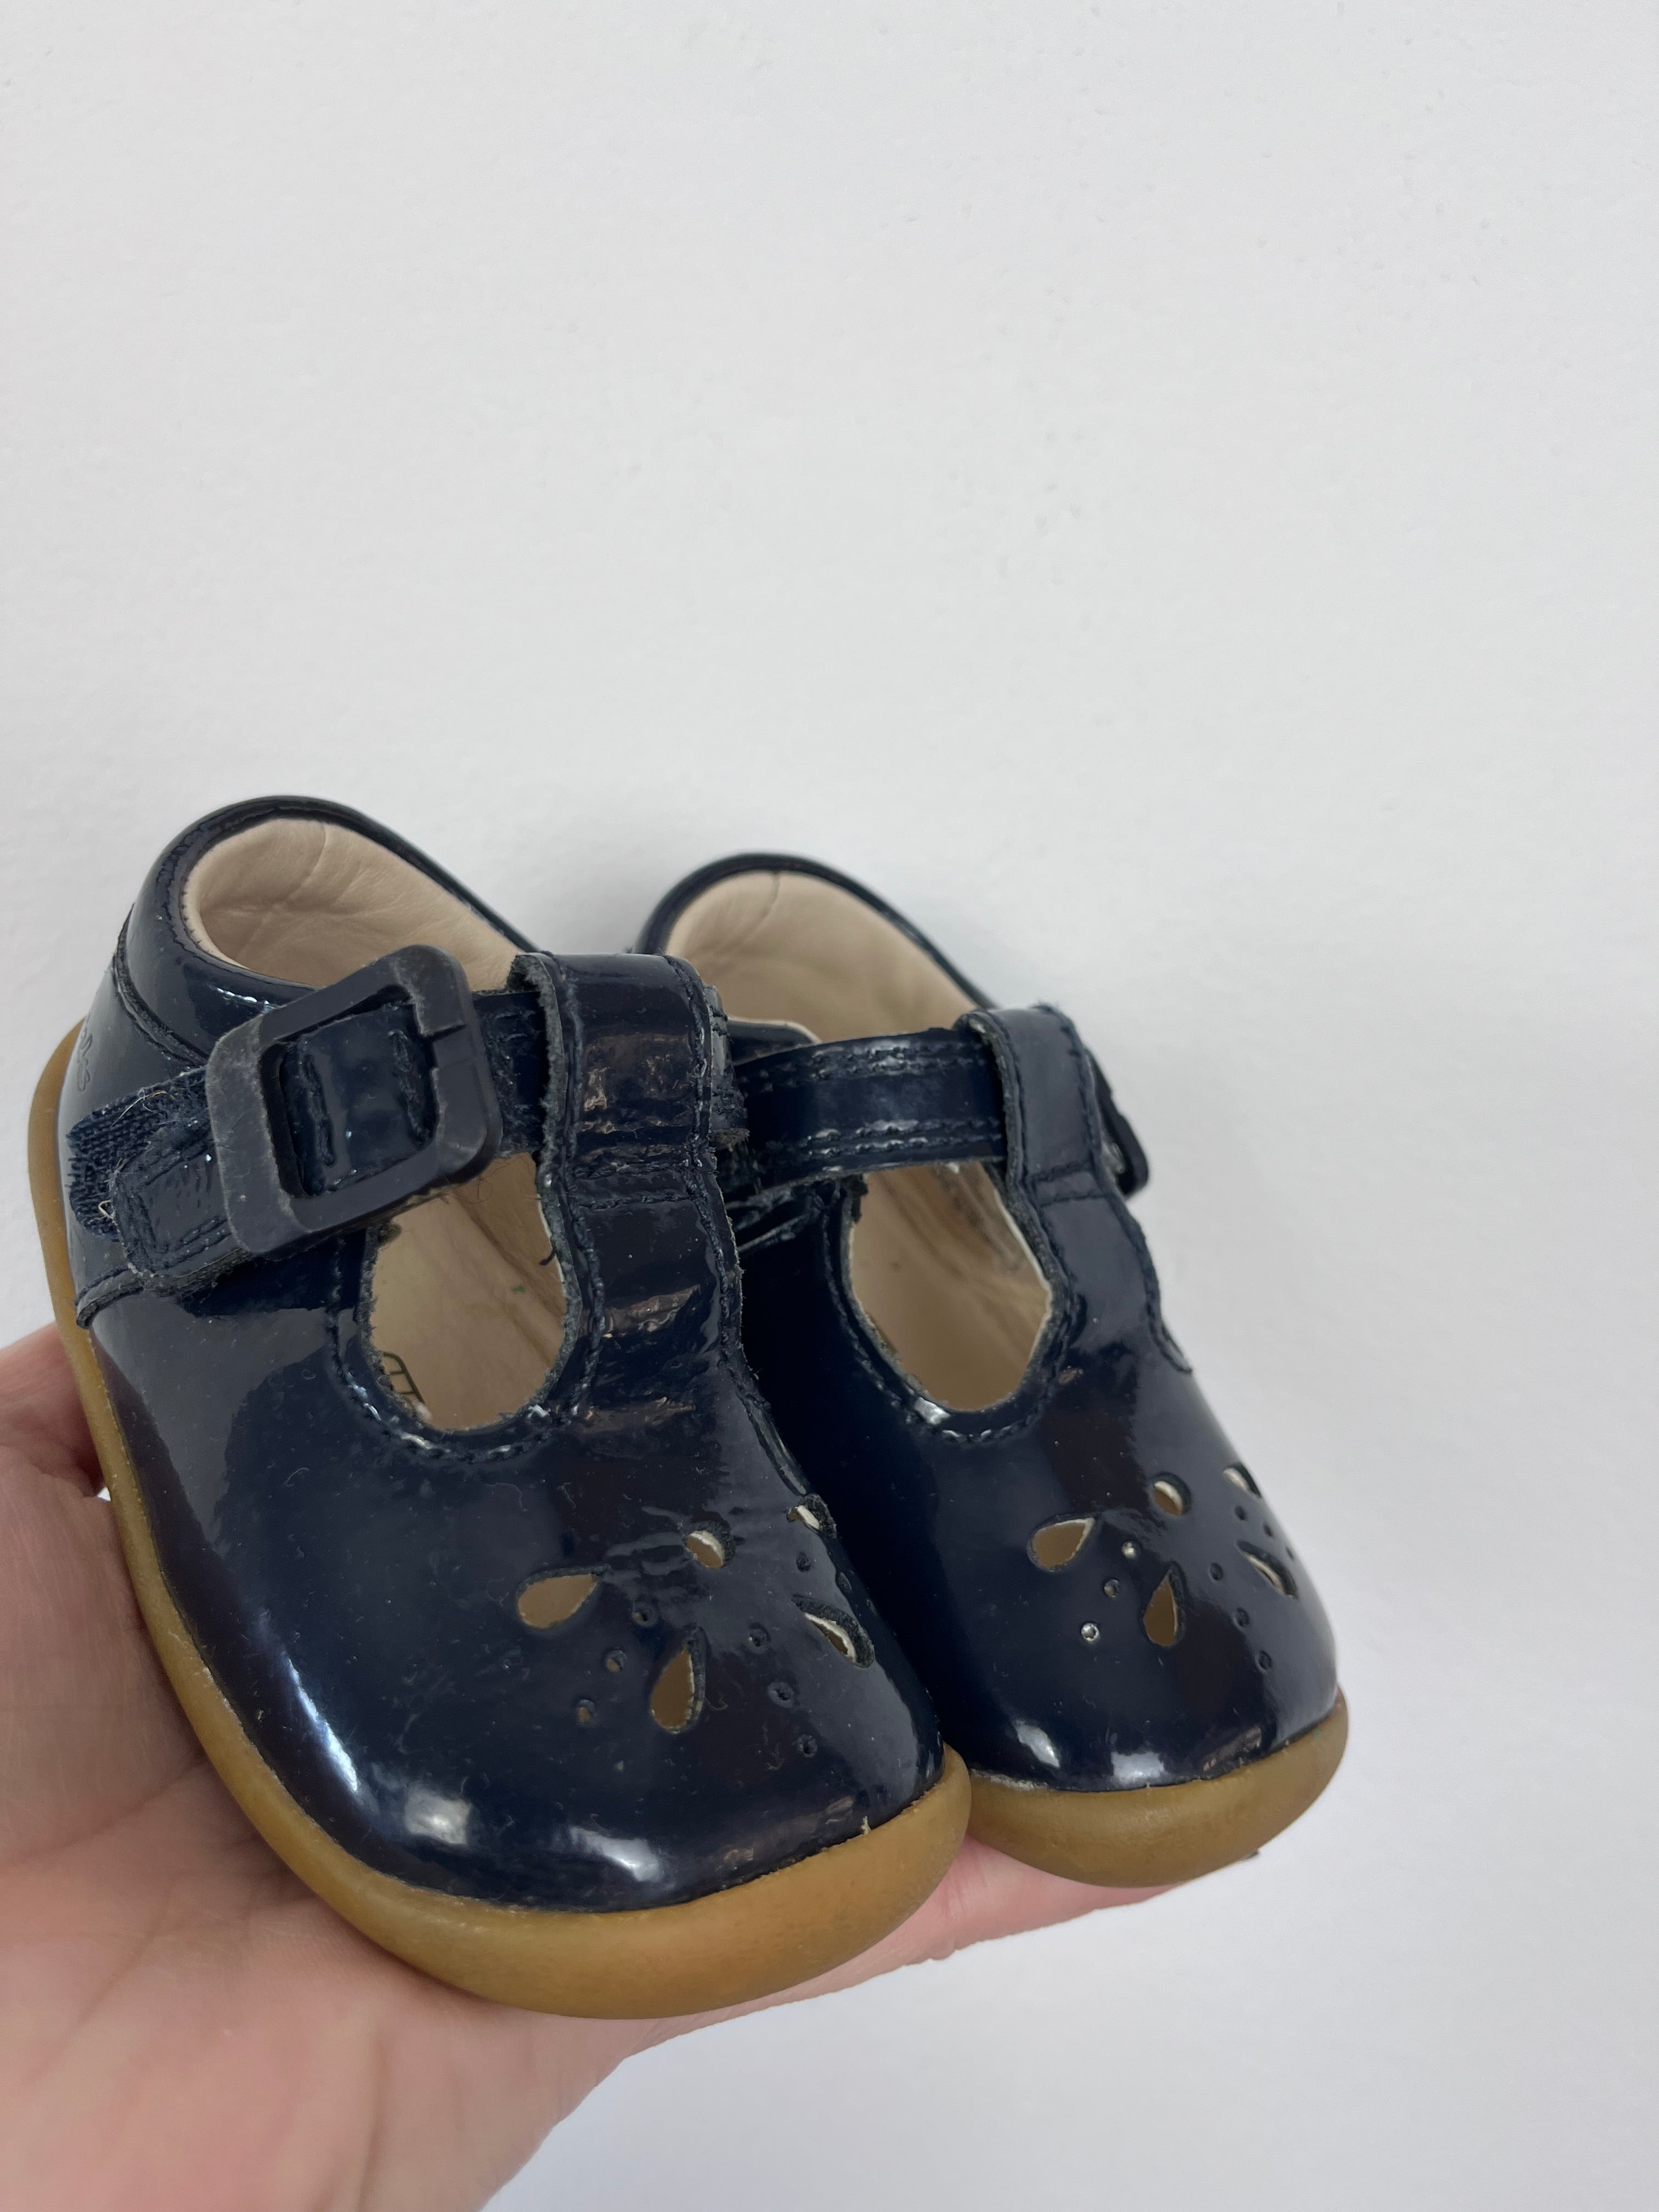 Clarks Size 2 1/2 G-Shoes-Second Snuggle Preloved